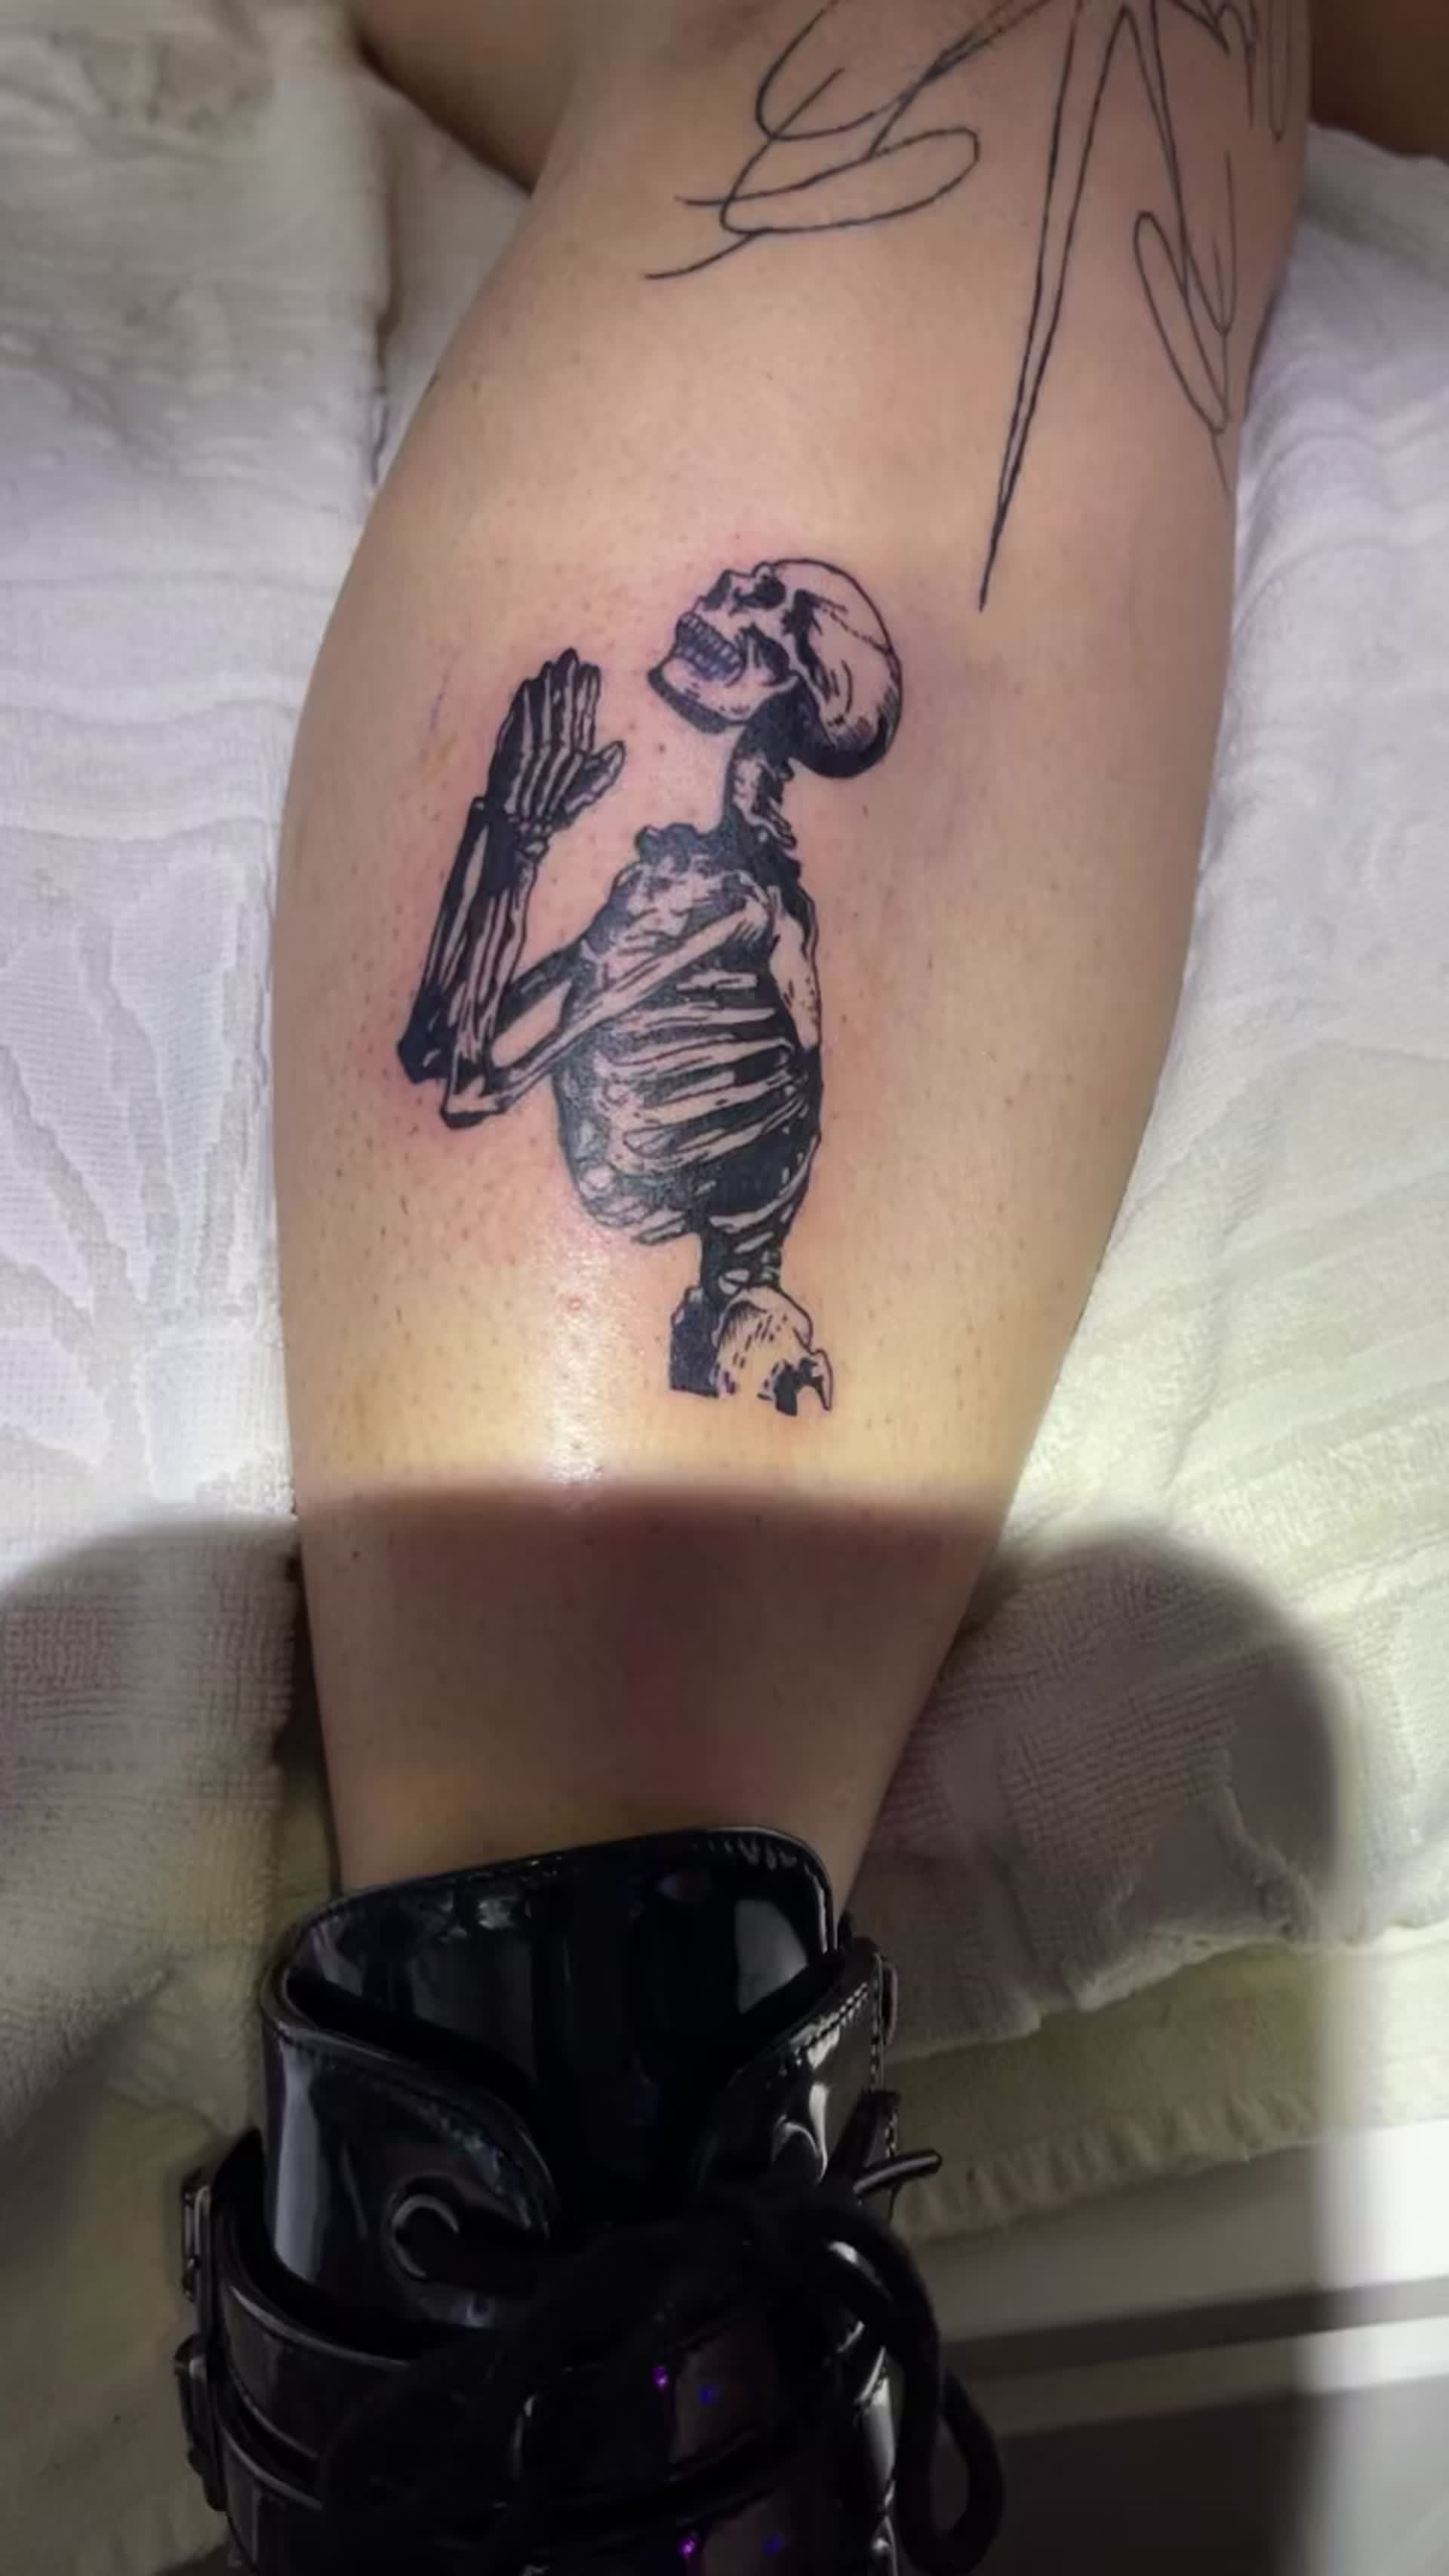 Share more than 63 uicideboy inspired tattoos  thtantai2